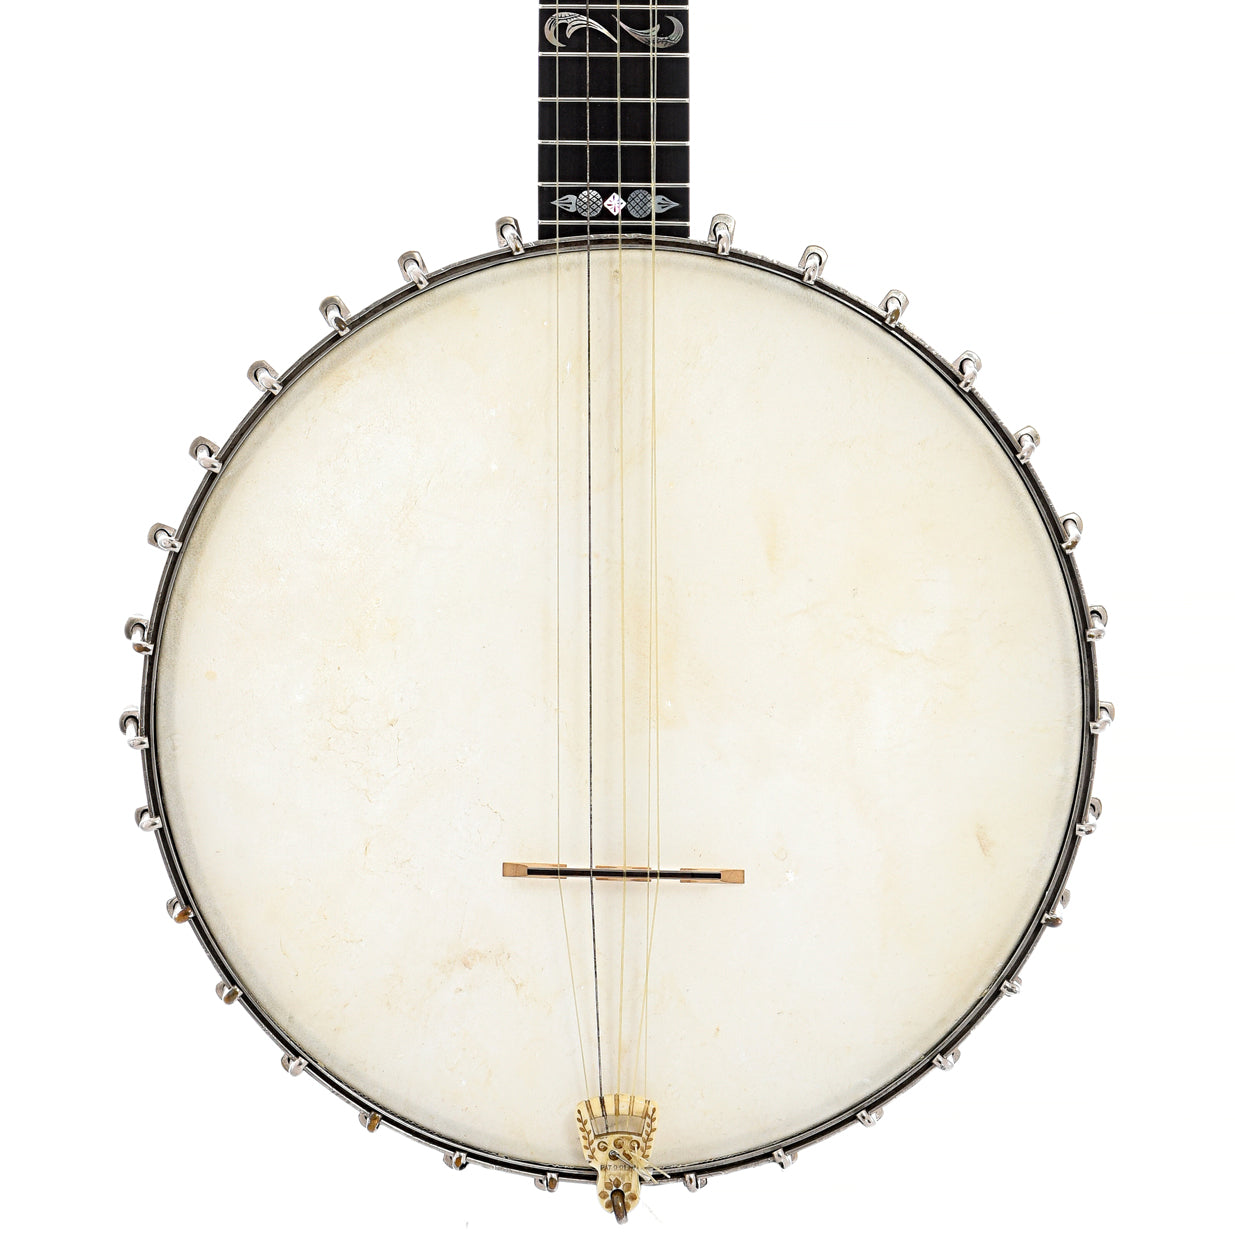 Front of A.C. Fairbanks Electric #3 Openback Banjo (c.1892-93)